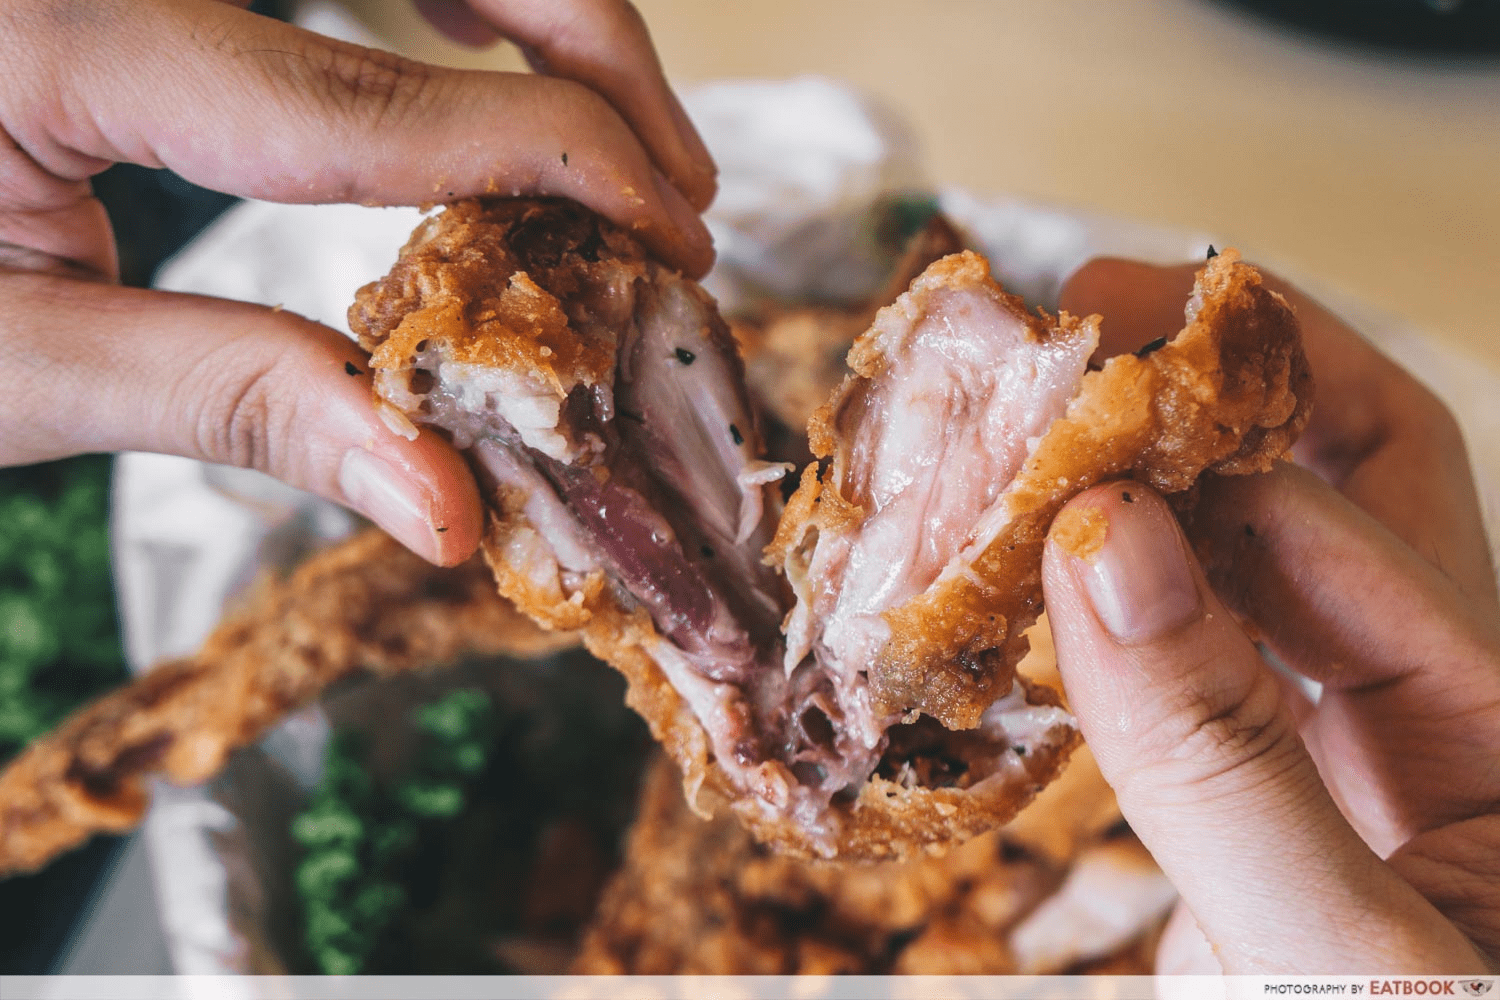 Fried chicken- popular food in Singapore that causes digestive problems